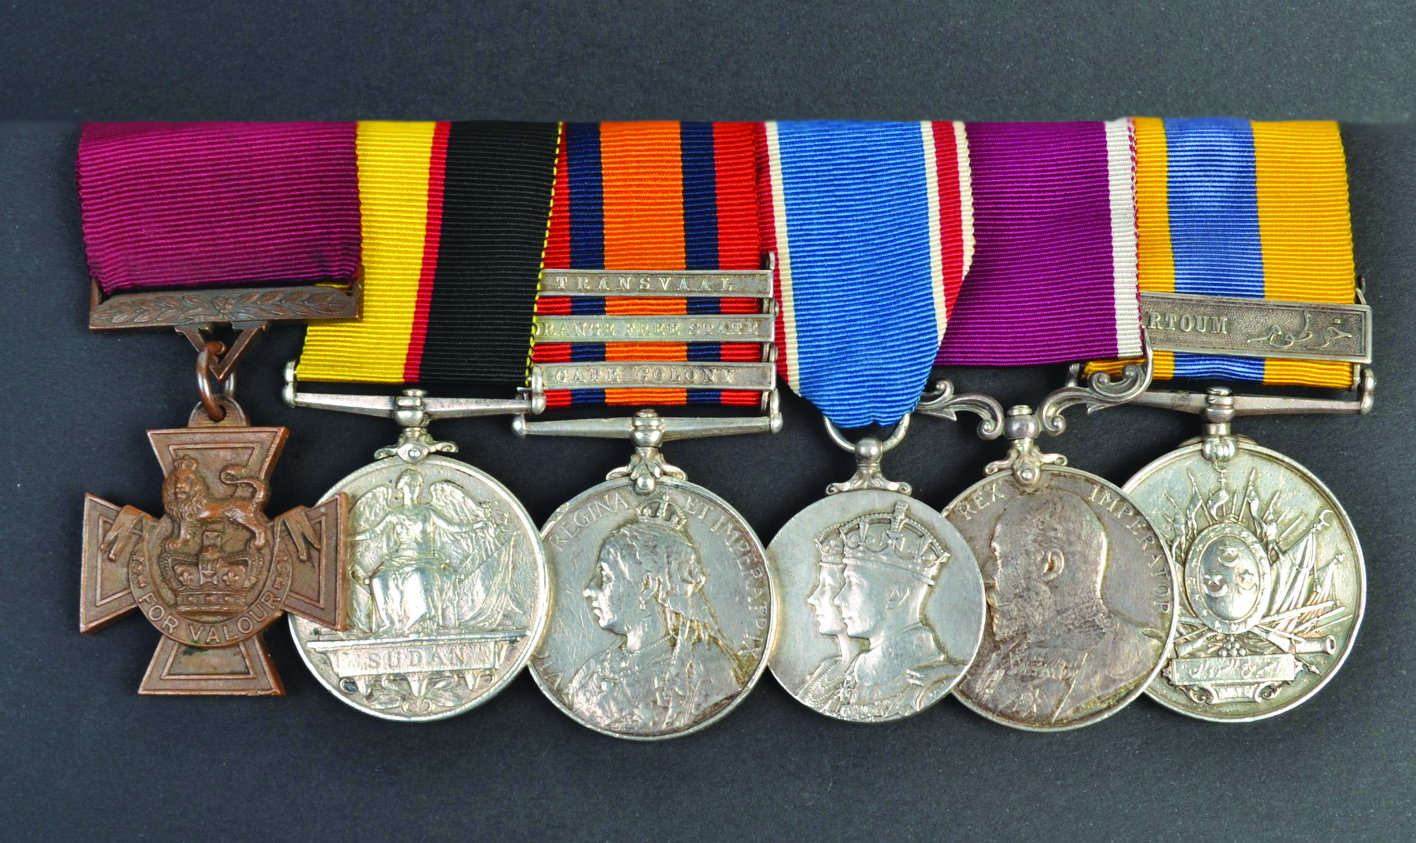 Medals awarded to Private Thomas Byrne. 